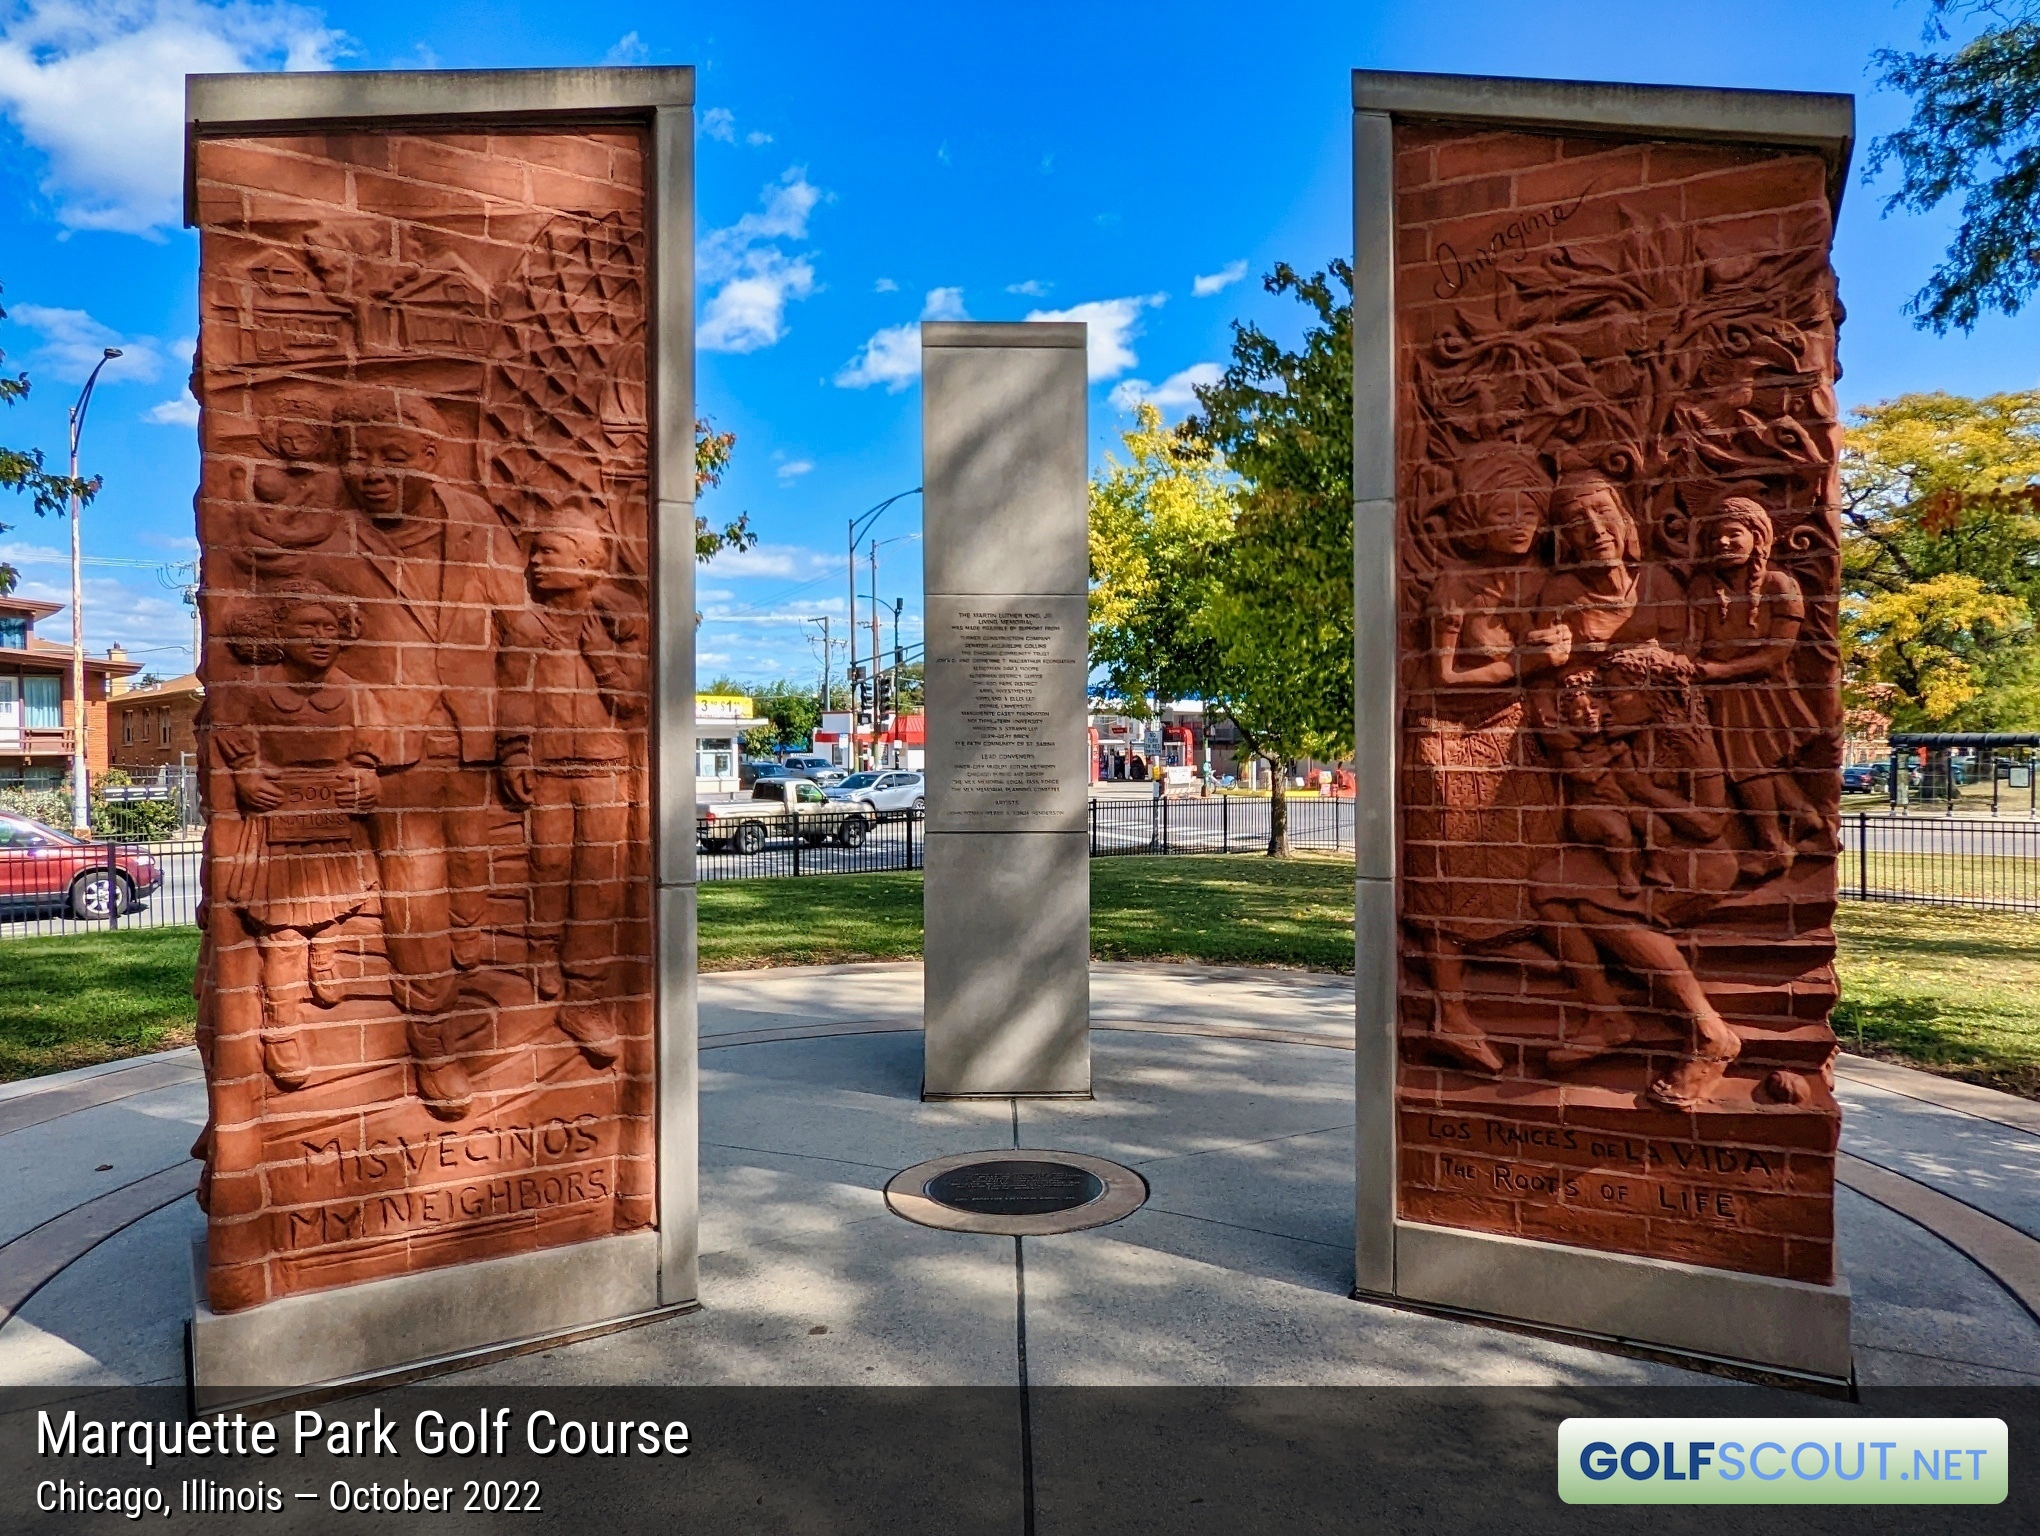 Miscellaneous photo of Marquette Park Golf Course in Chicago, Illinois. The MLK Living Memorial.